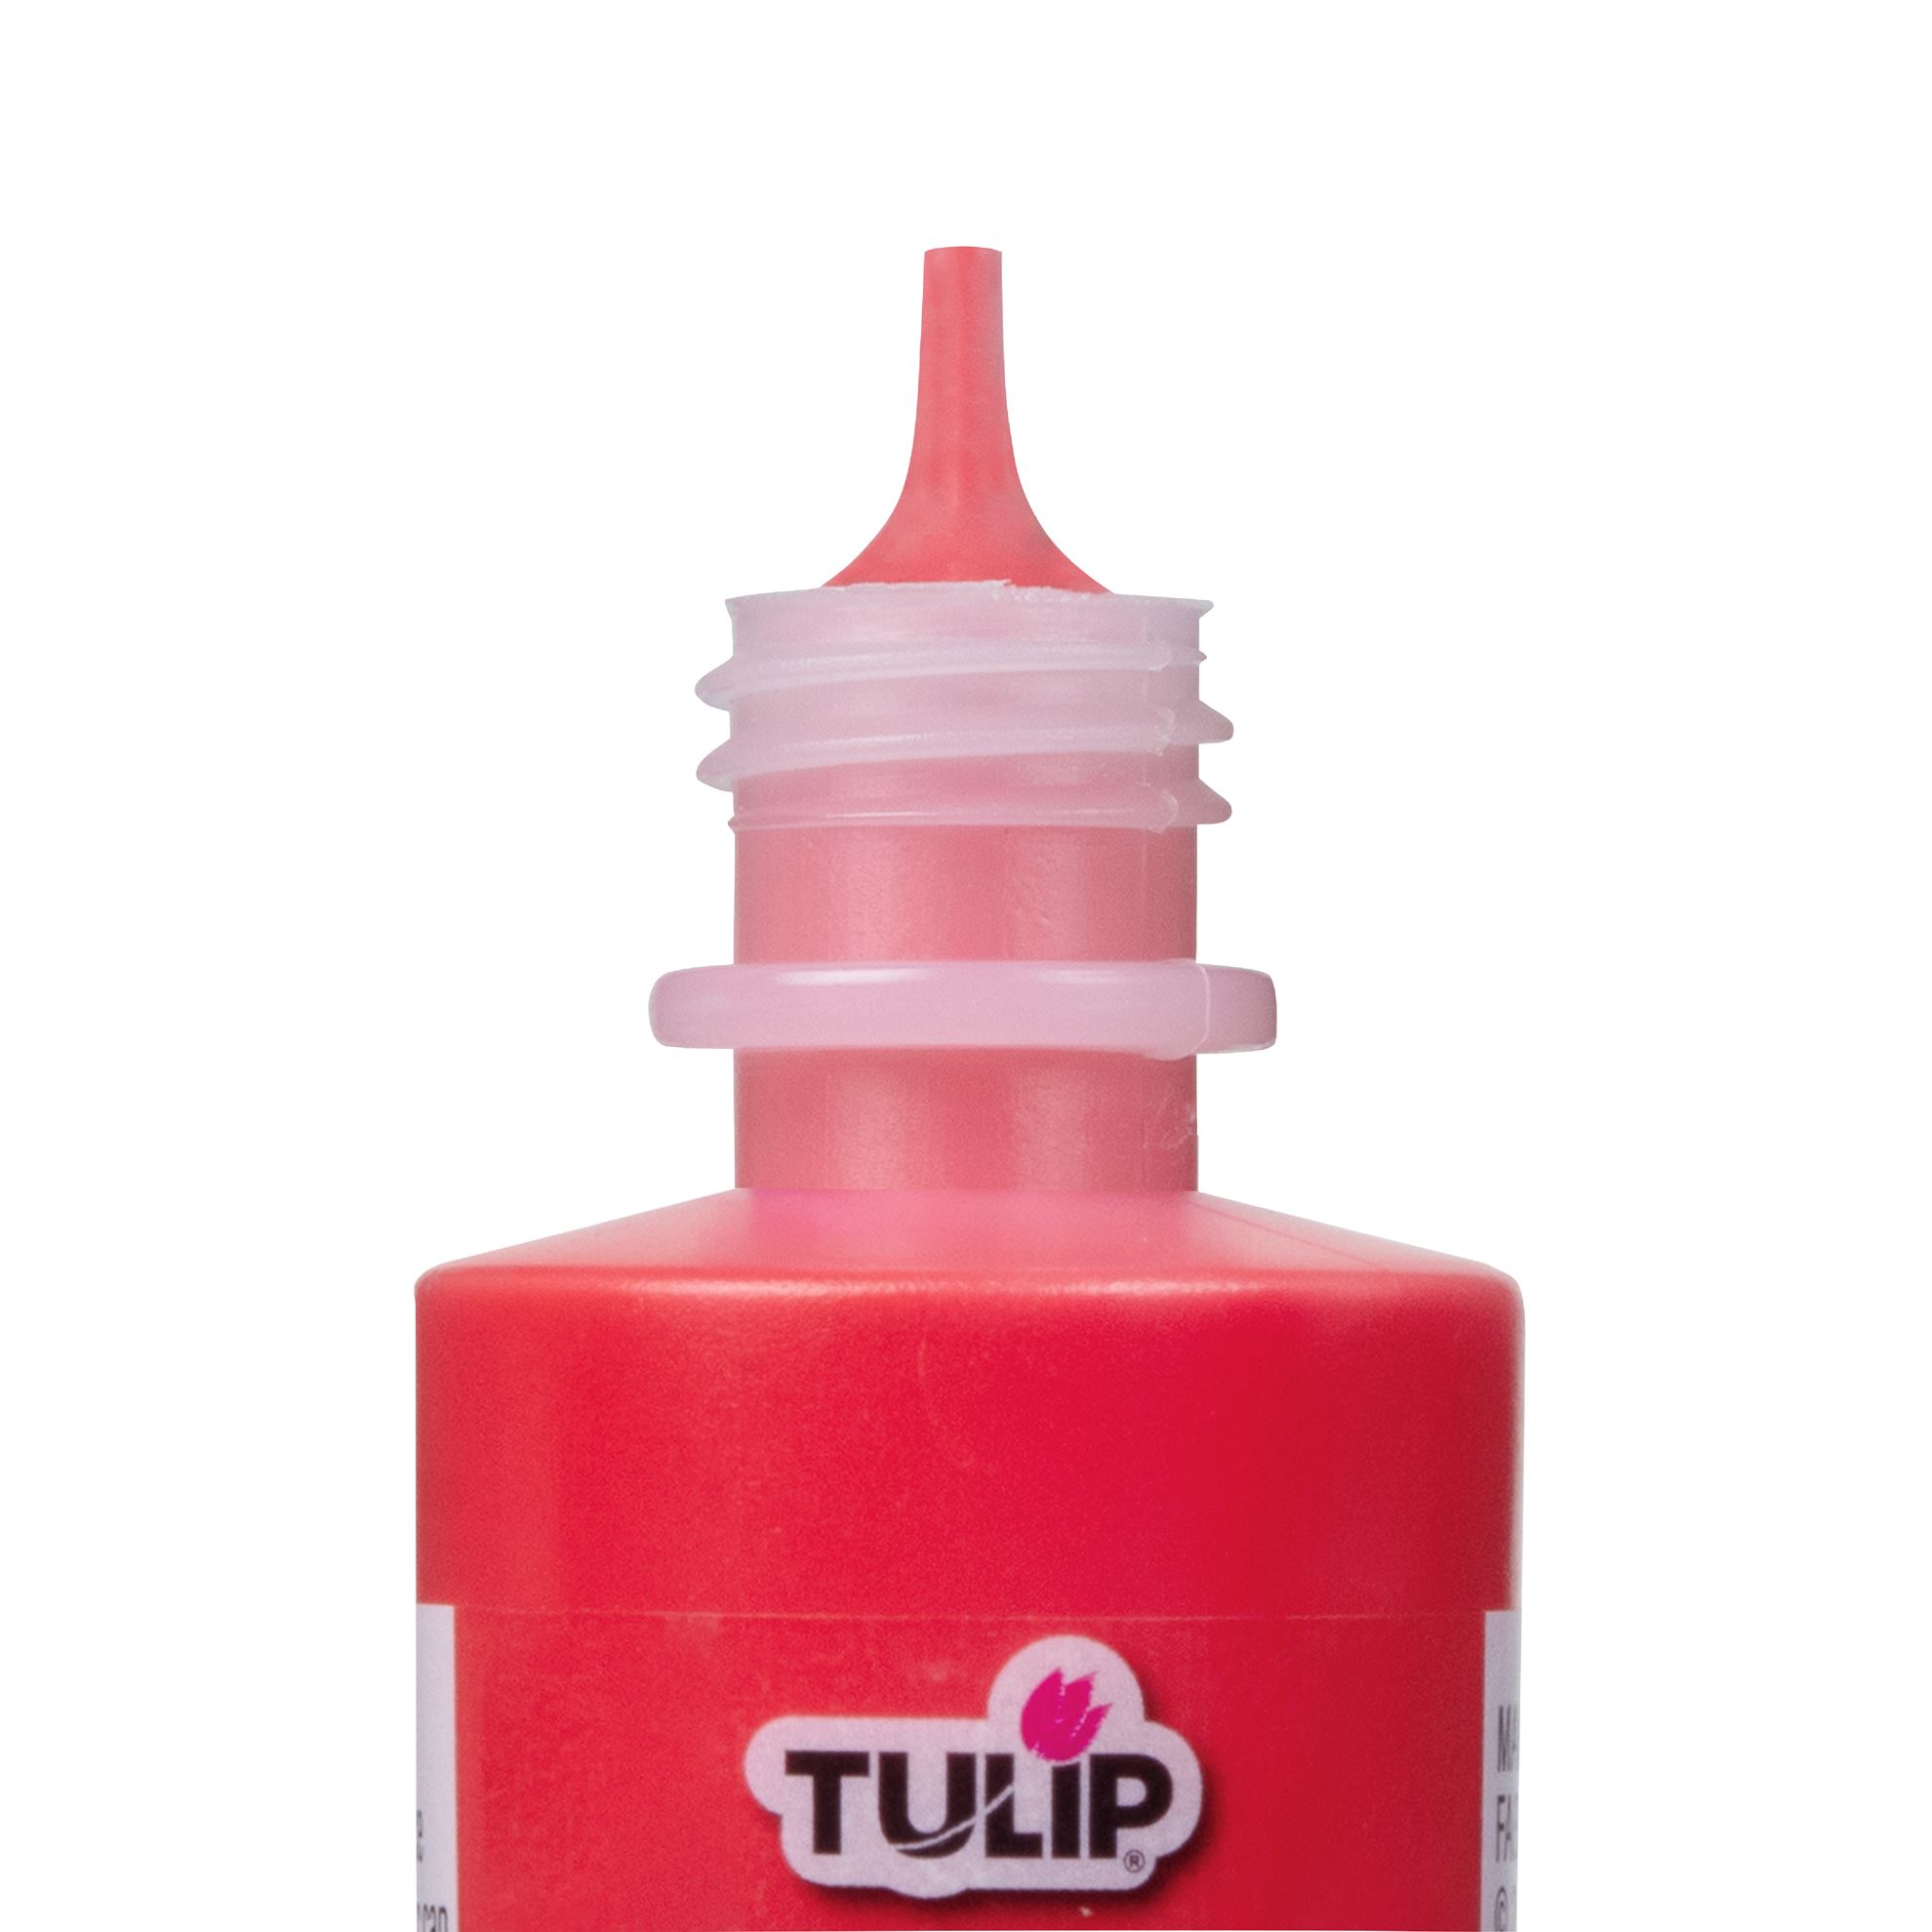 Tulip • Dimensional fabric paint Matte Real red 4oz.